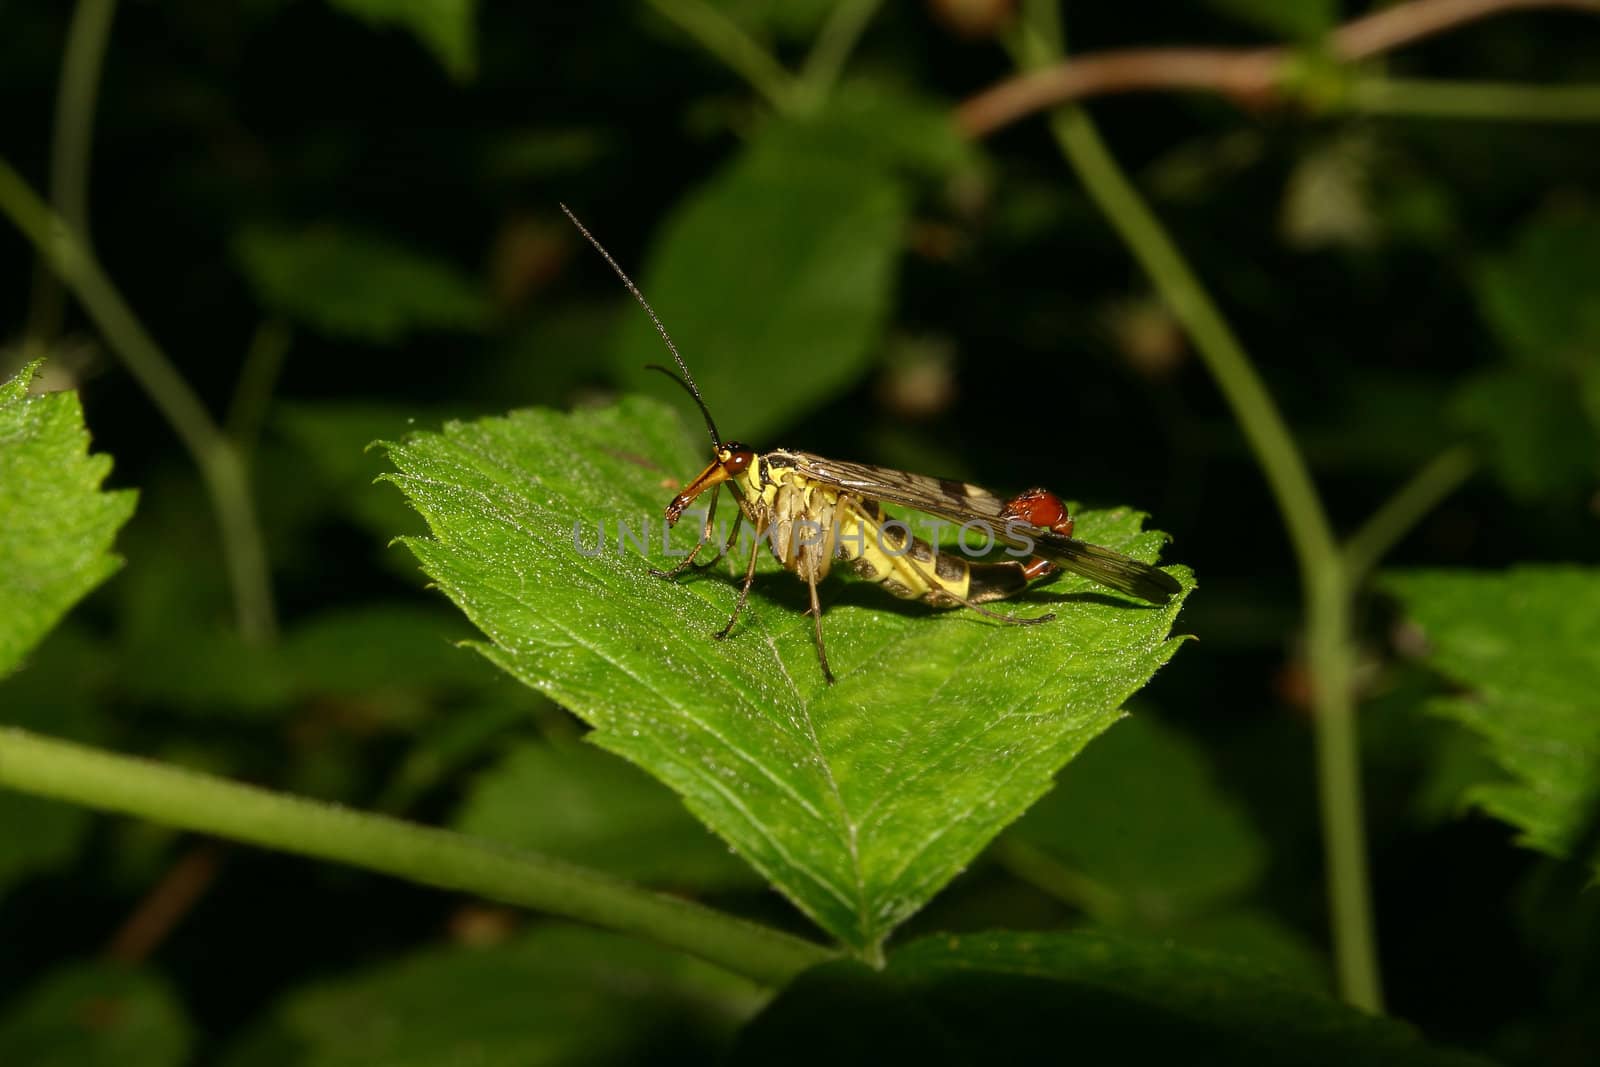 Common scorpionfly (Panorpa communis) by tdietrich